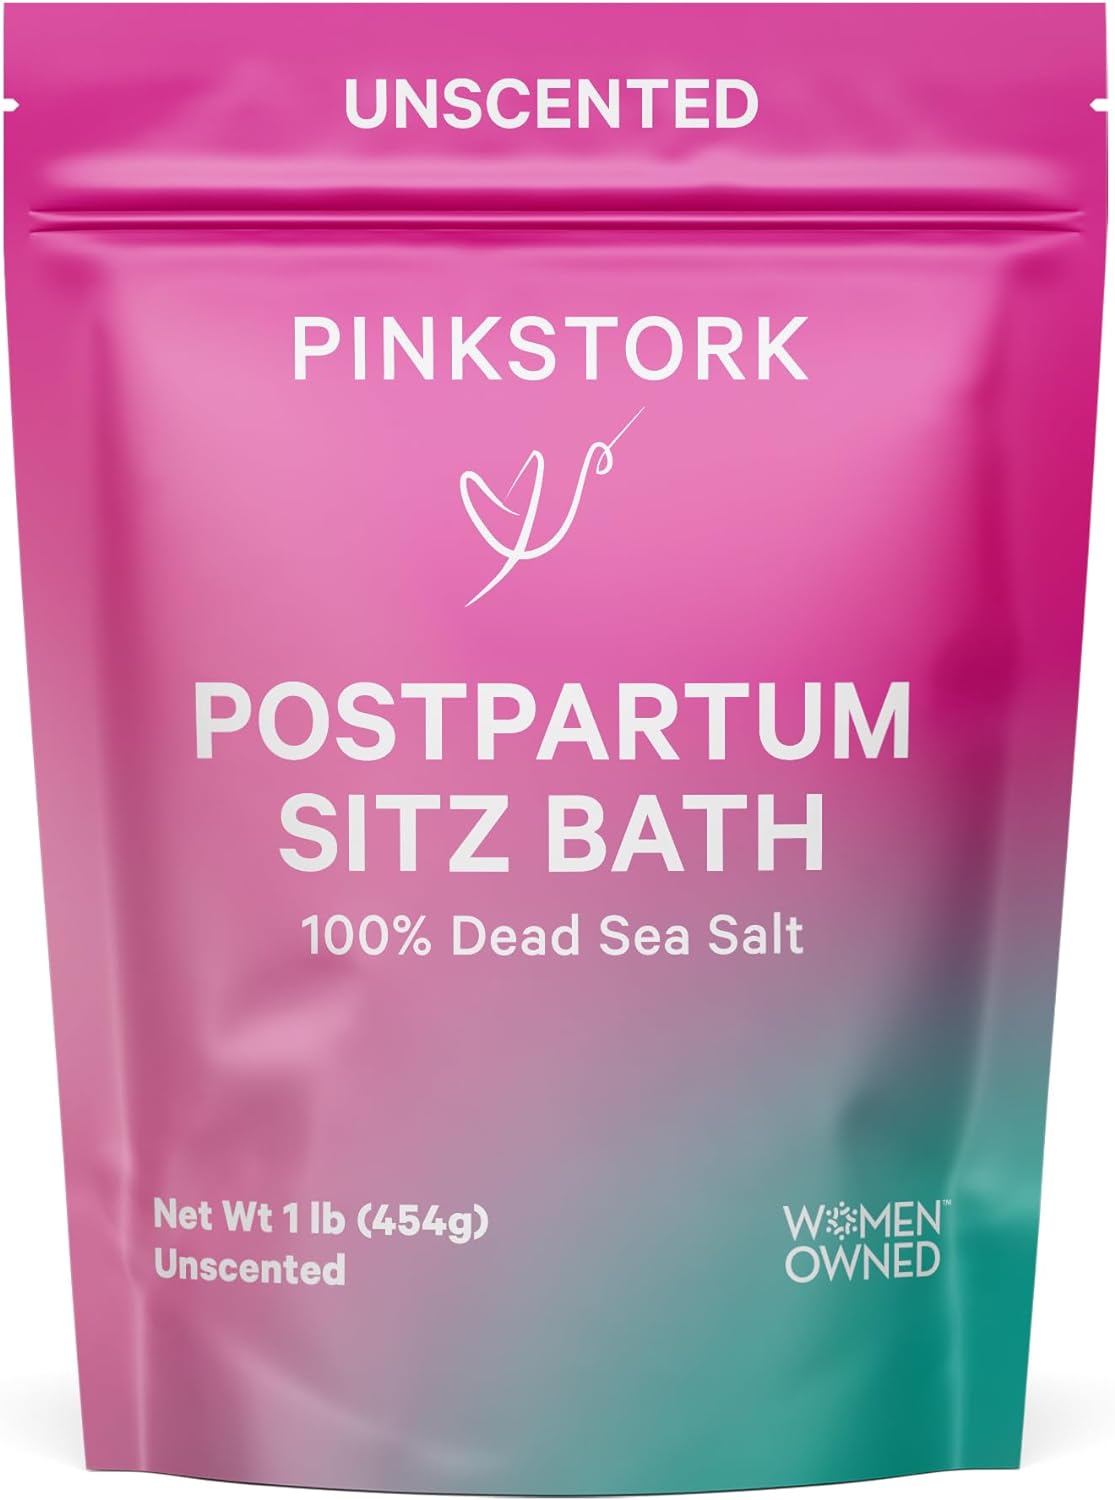 Pink Stork Postpartum Sitz Bath Soak: Dead Sea Salt for Perineal Care & Cleansing, Postpartum Recovery, Labor and Delivery Essentials, Women-Owned, Unscented, 16 oz